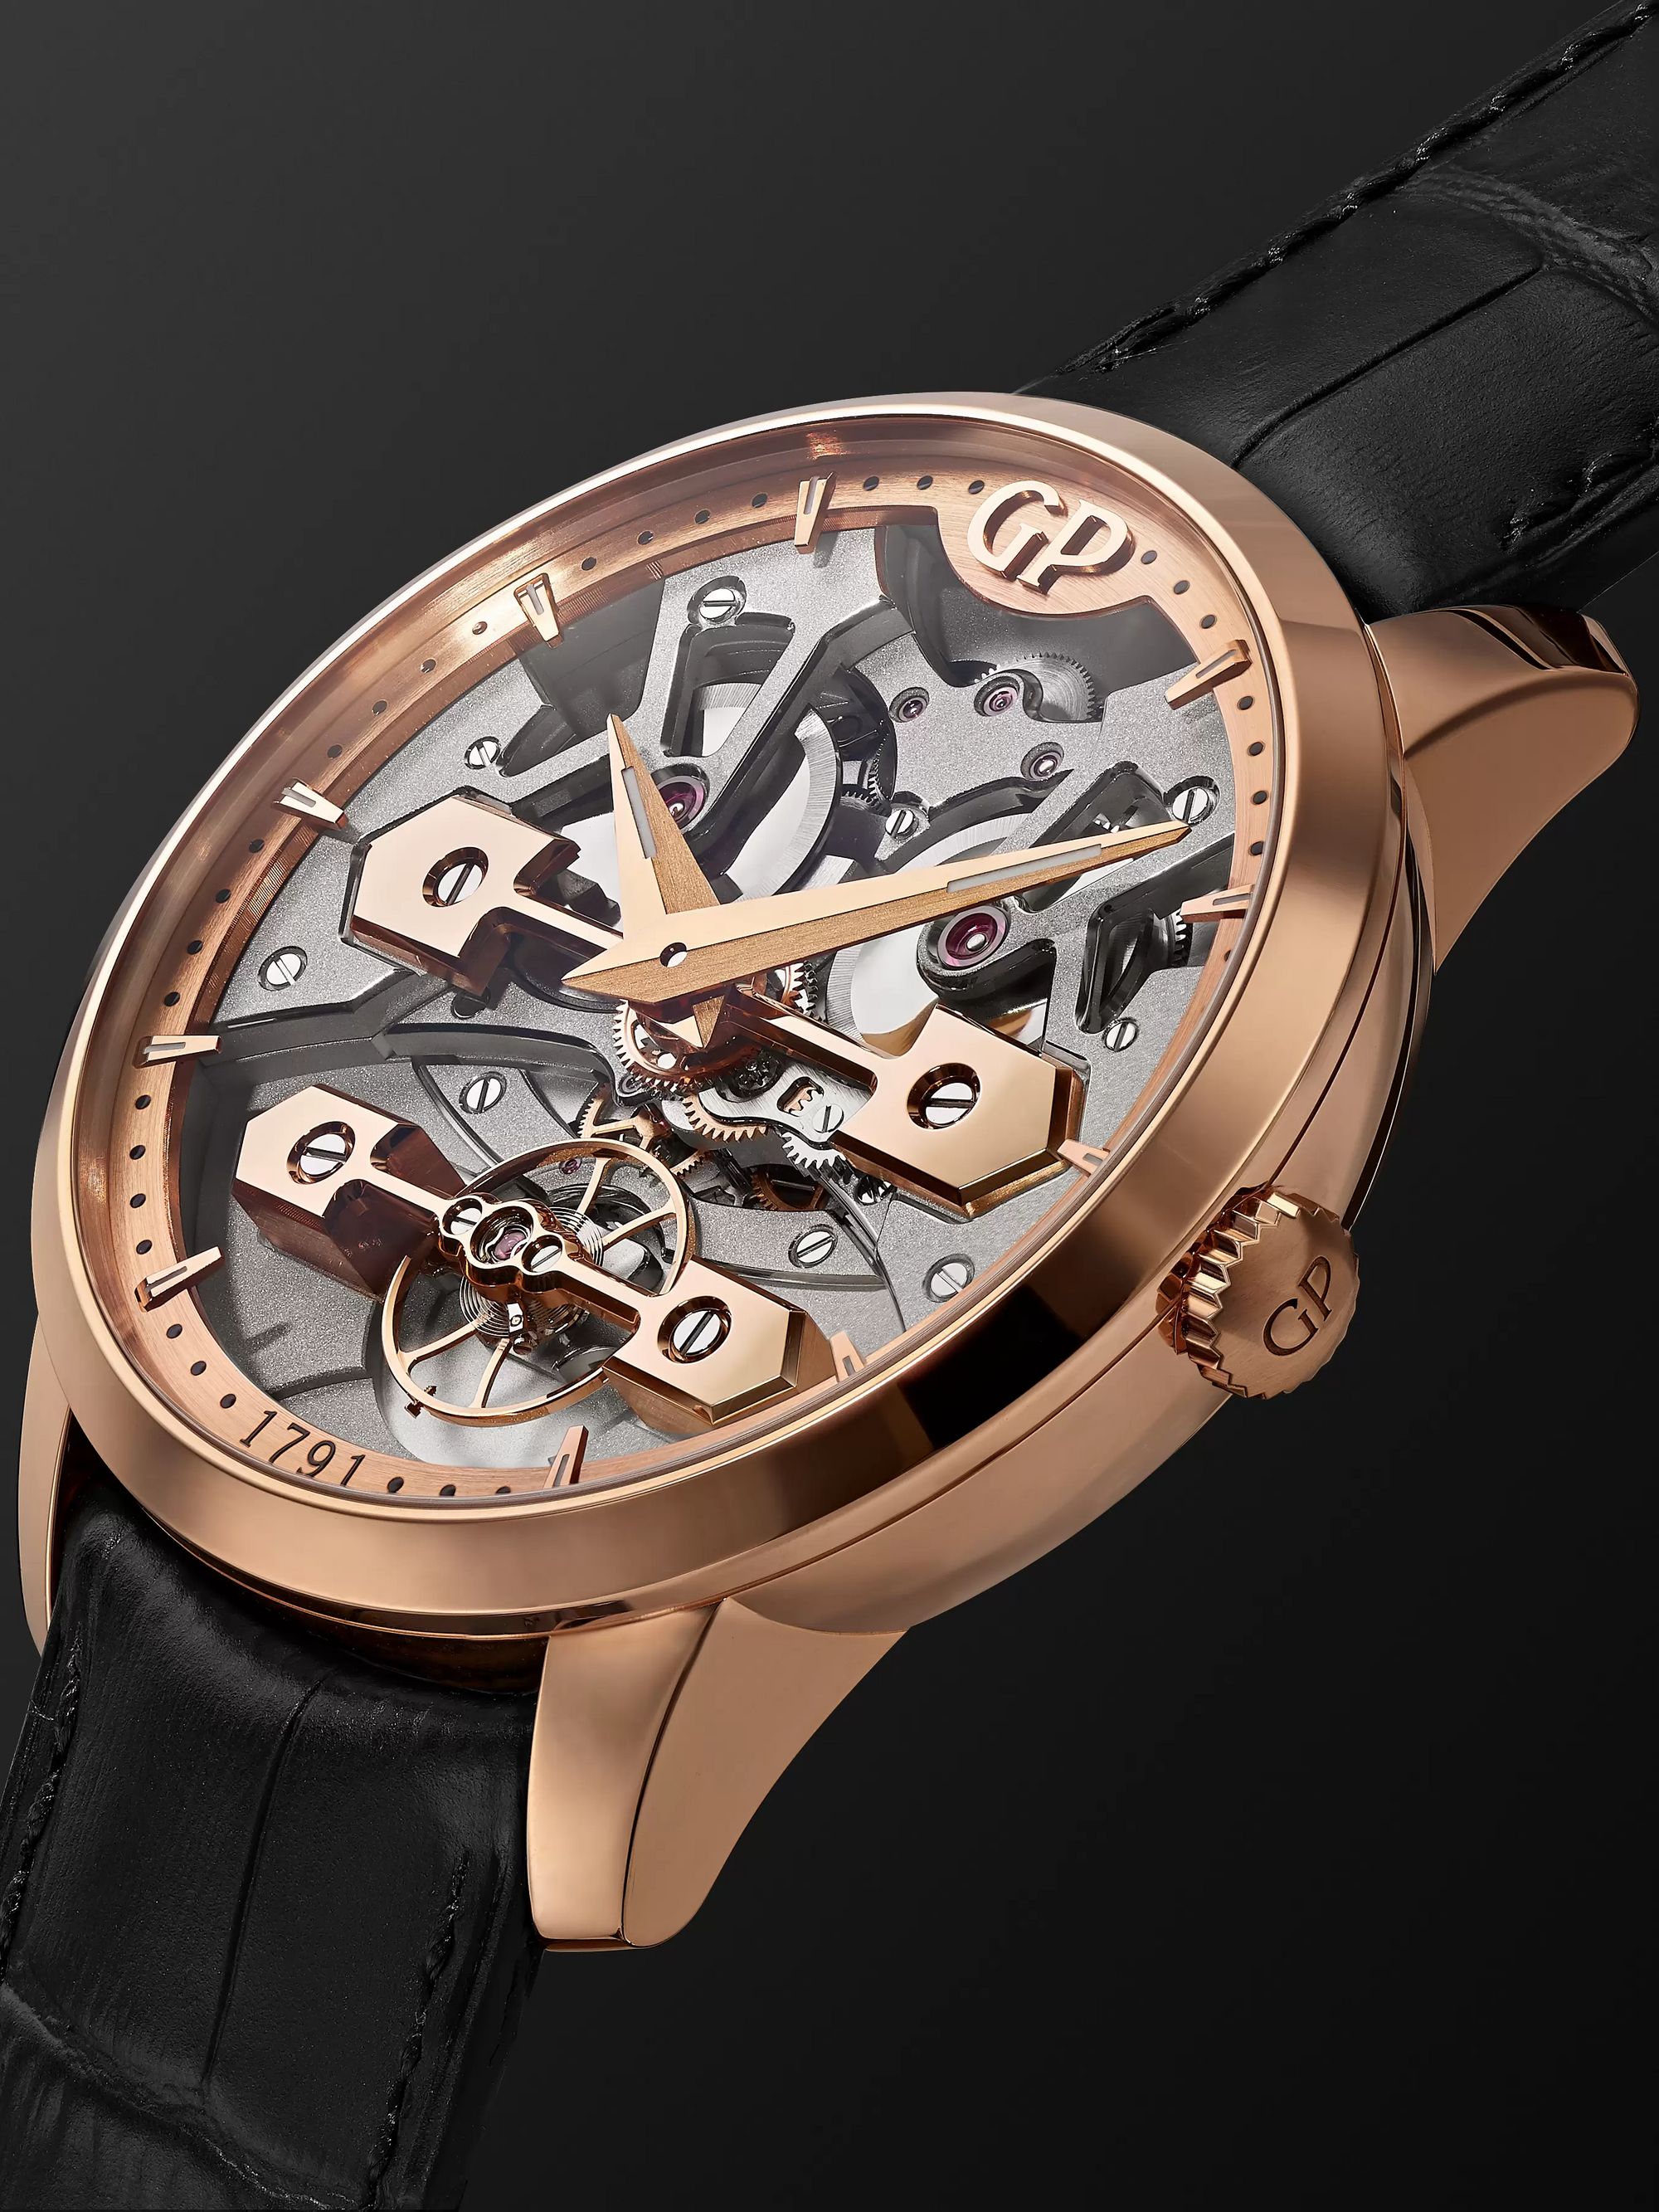 GIRARD-PERREGAUX Classic Bridges Automatic Skeleton 45mm Rose Gold and Alligator Watch, Ref. No. 86000-52-001-BB6A